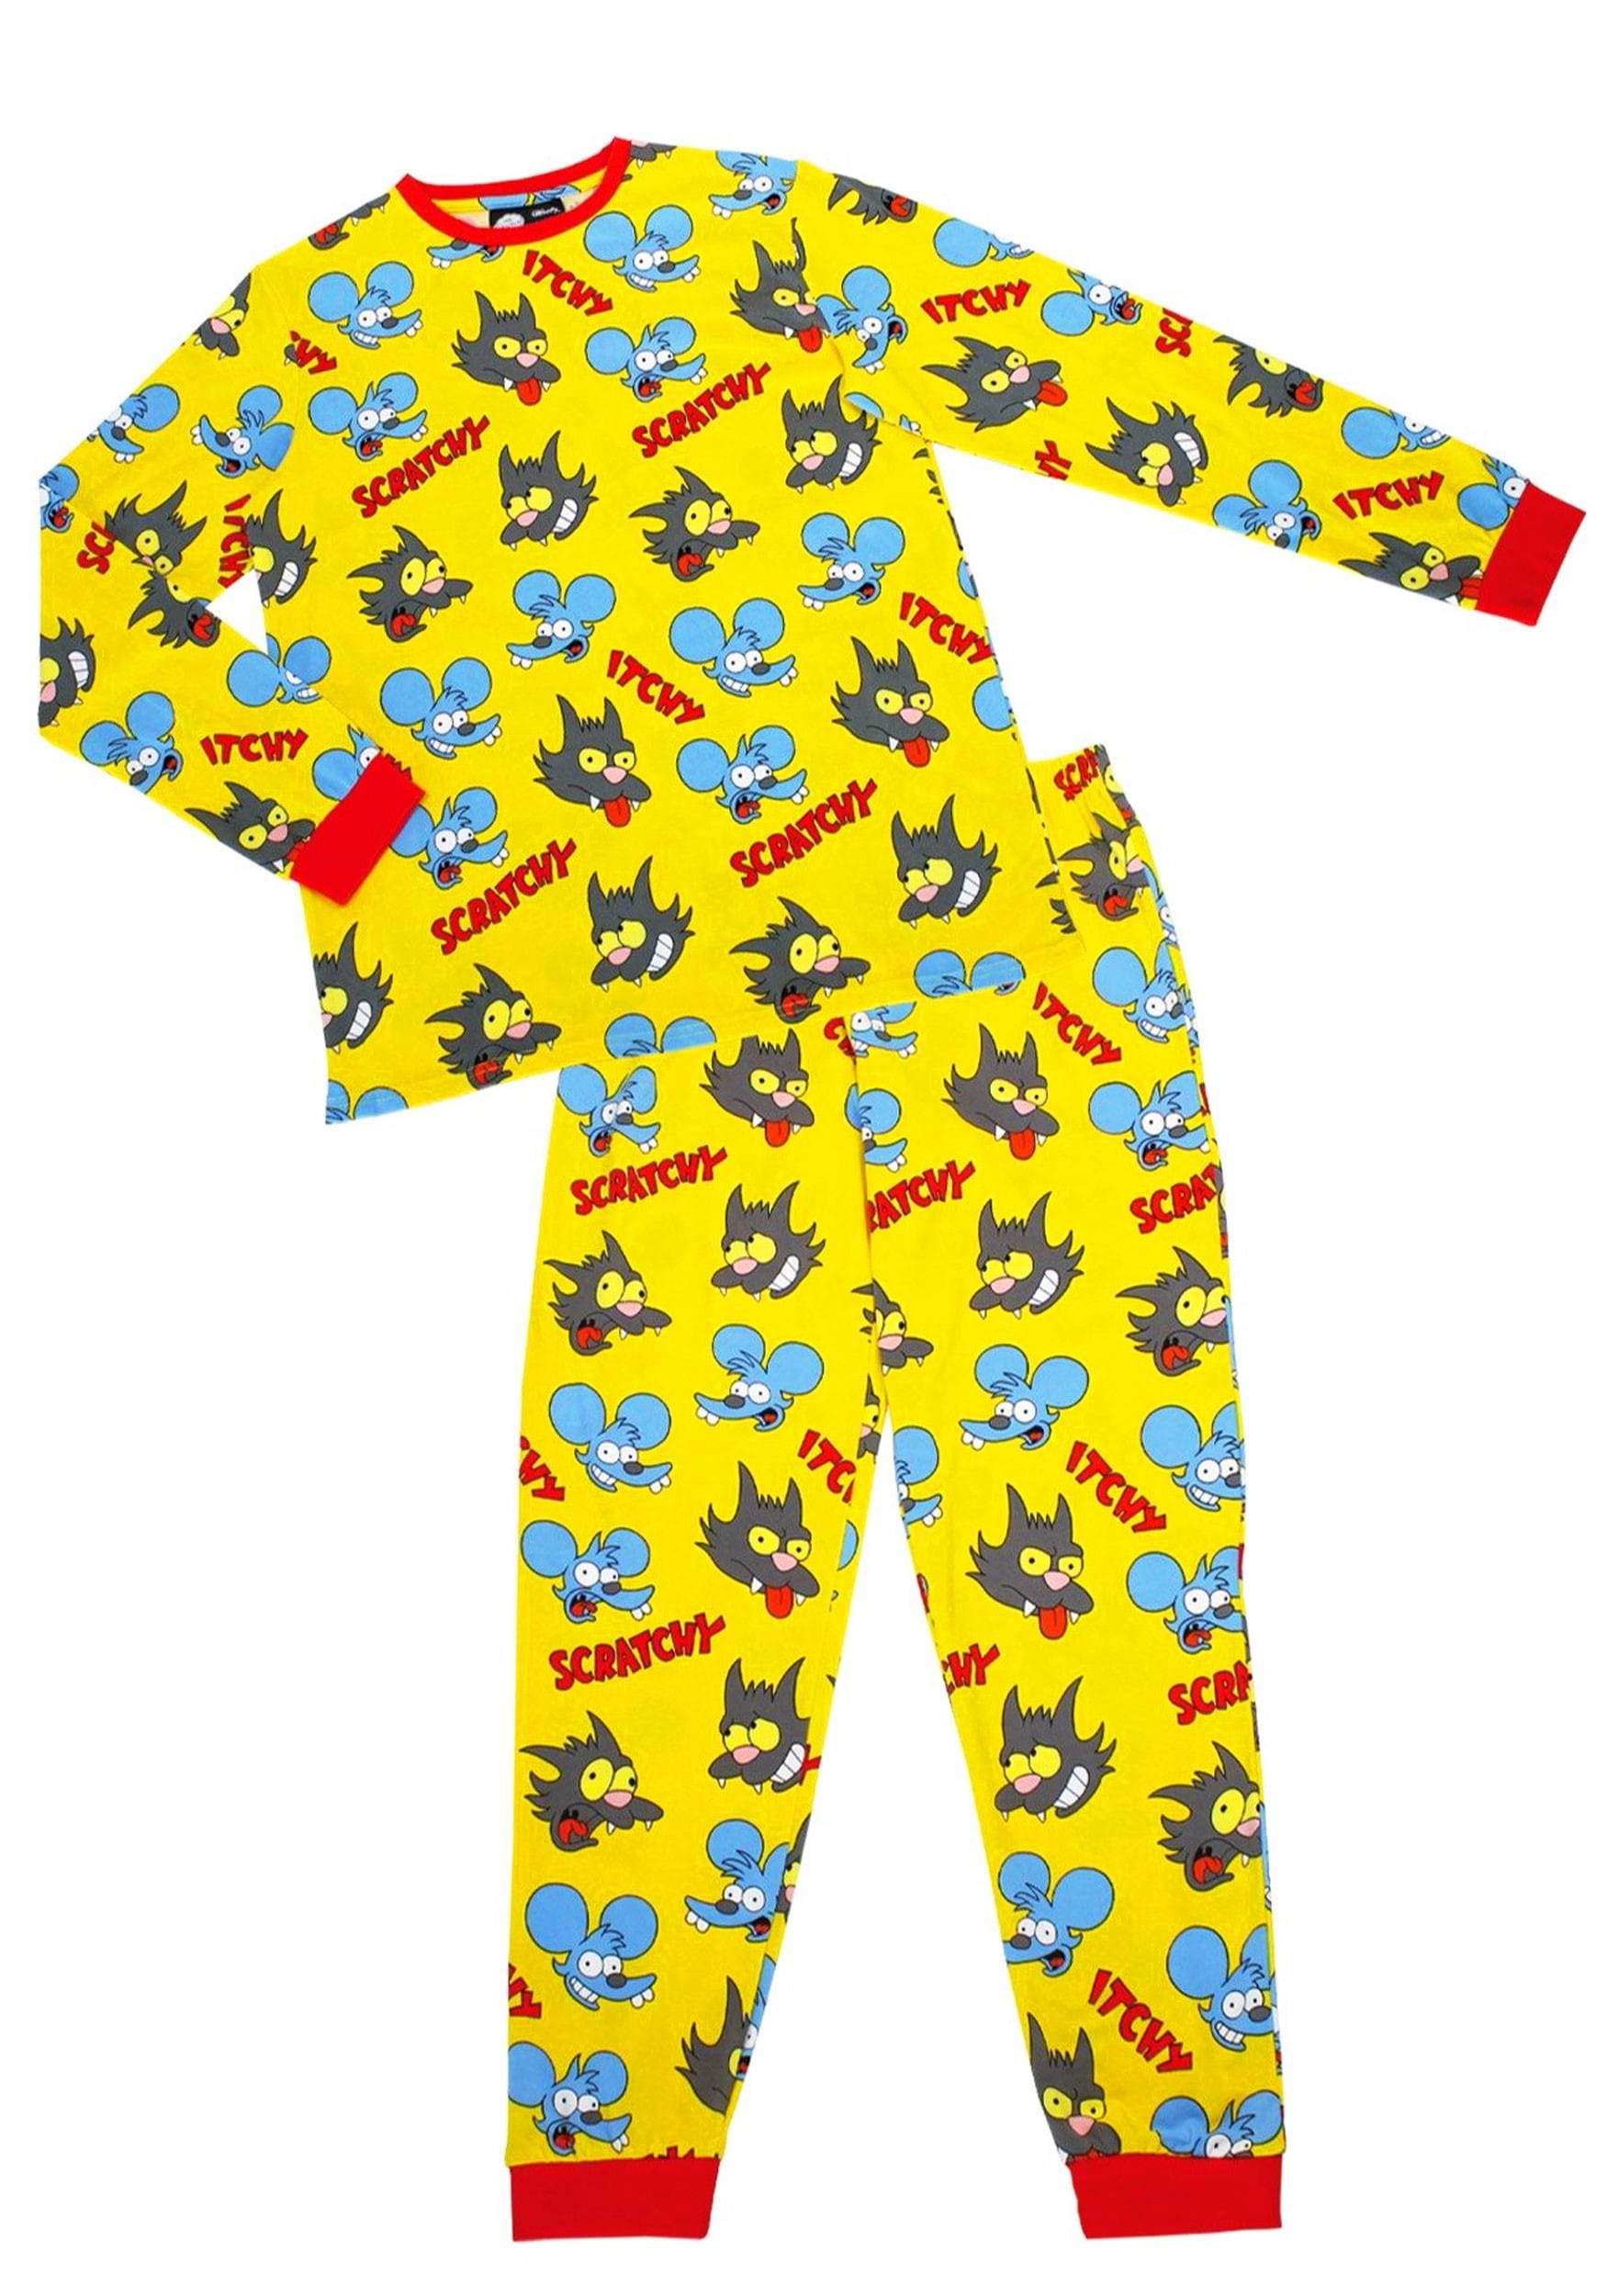 Cakeworthy Itchy and Scratchy Unisex PJ Set